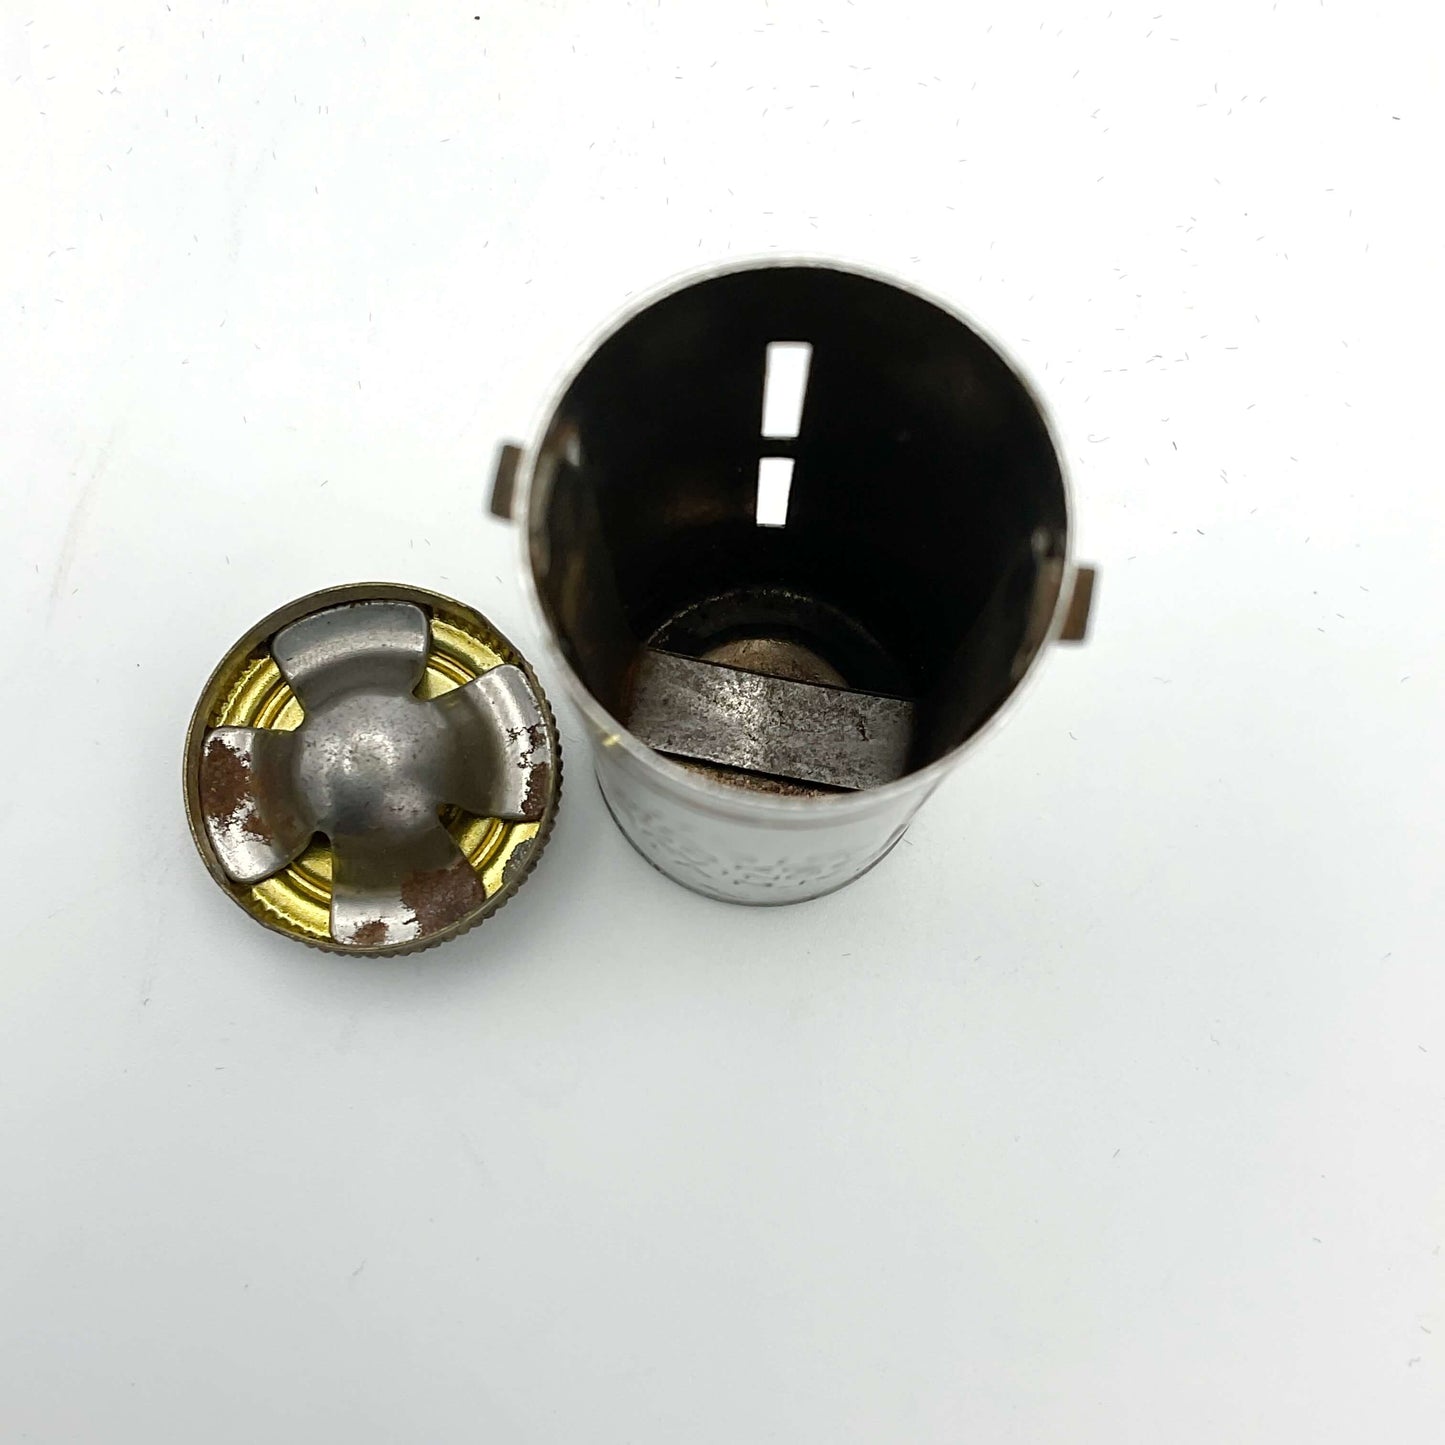 View of the inside of the vintage coin holder with the lid off